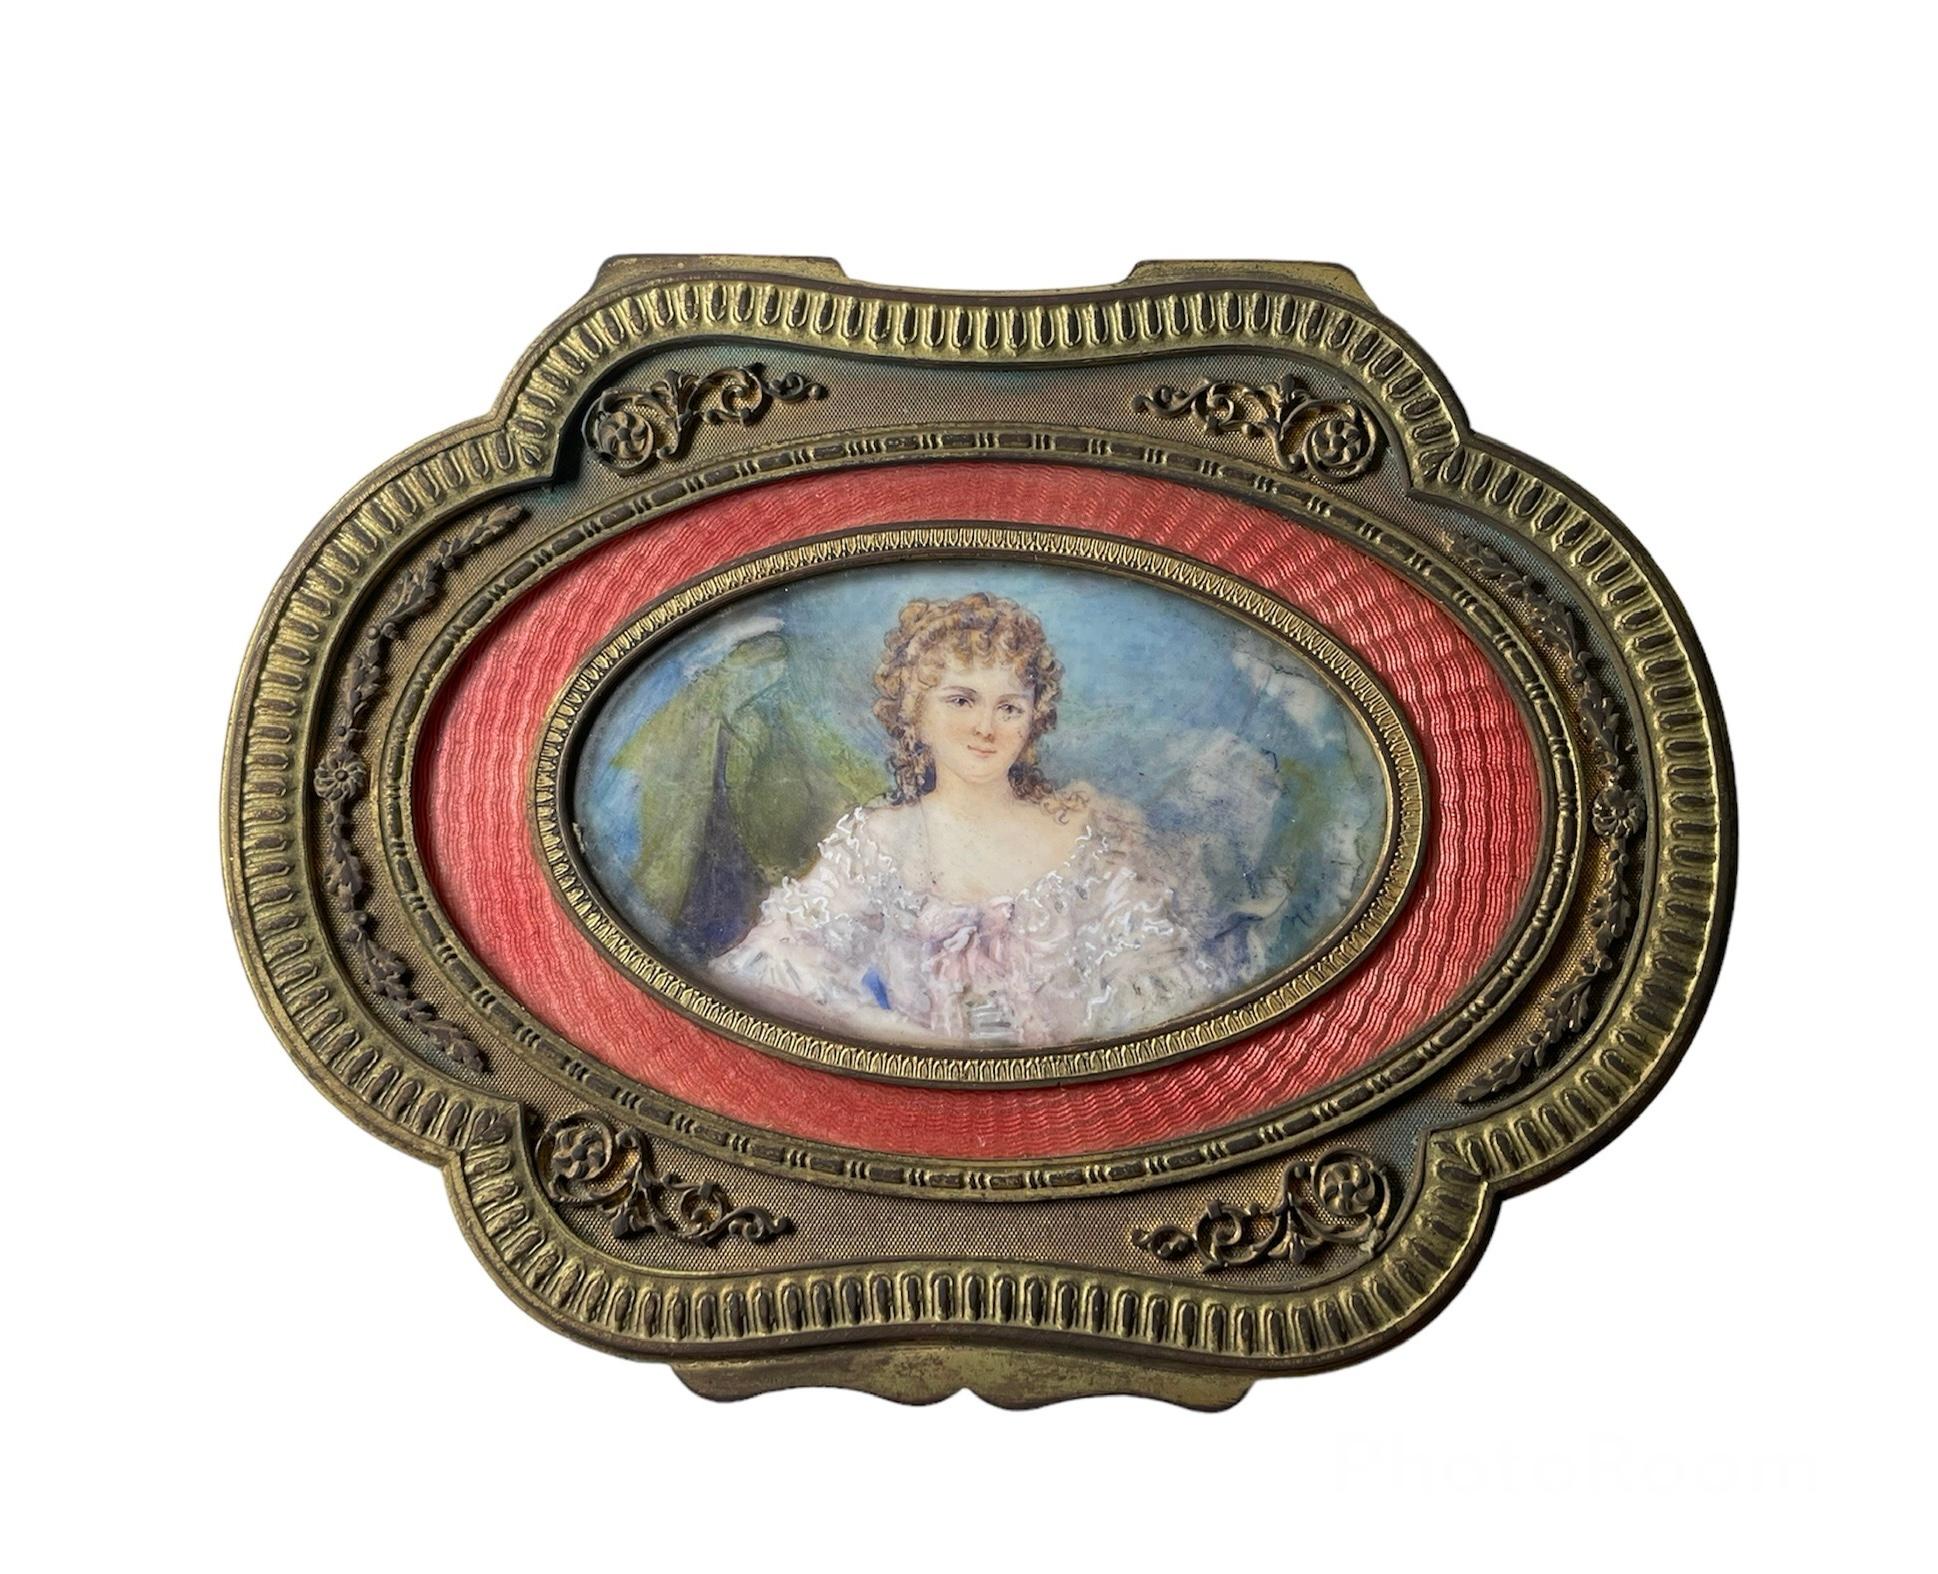 This a French bronze metal hand painted portrait vanity box. It depicts a quatrefoil shaped hinged lid that is decorated in the center with the portrait of a young lady. An orange color guilloche inset panel framed the portrait, then a relief of